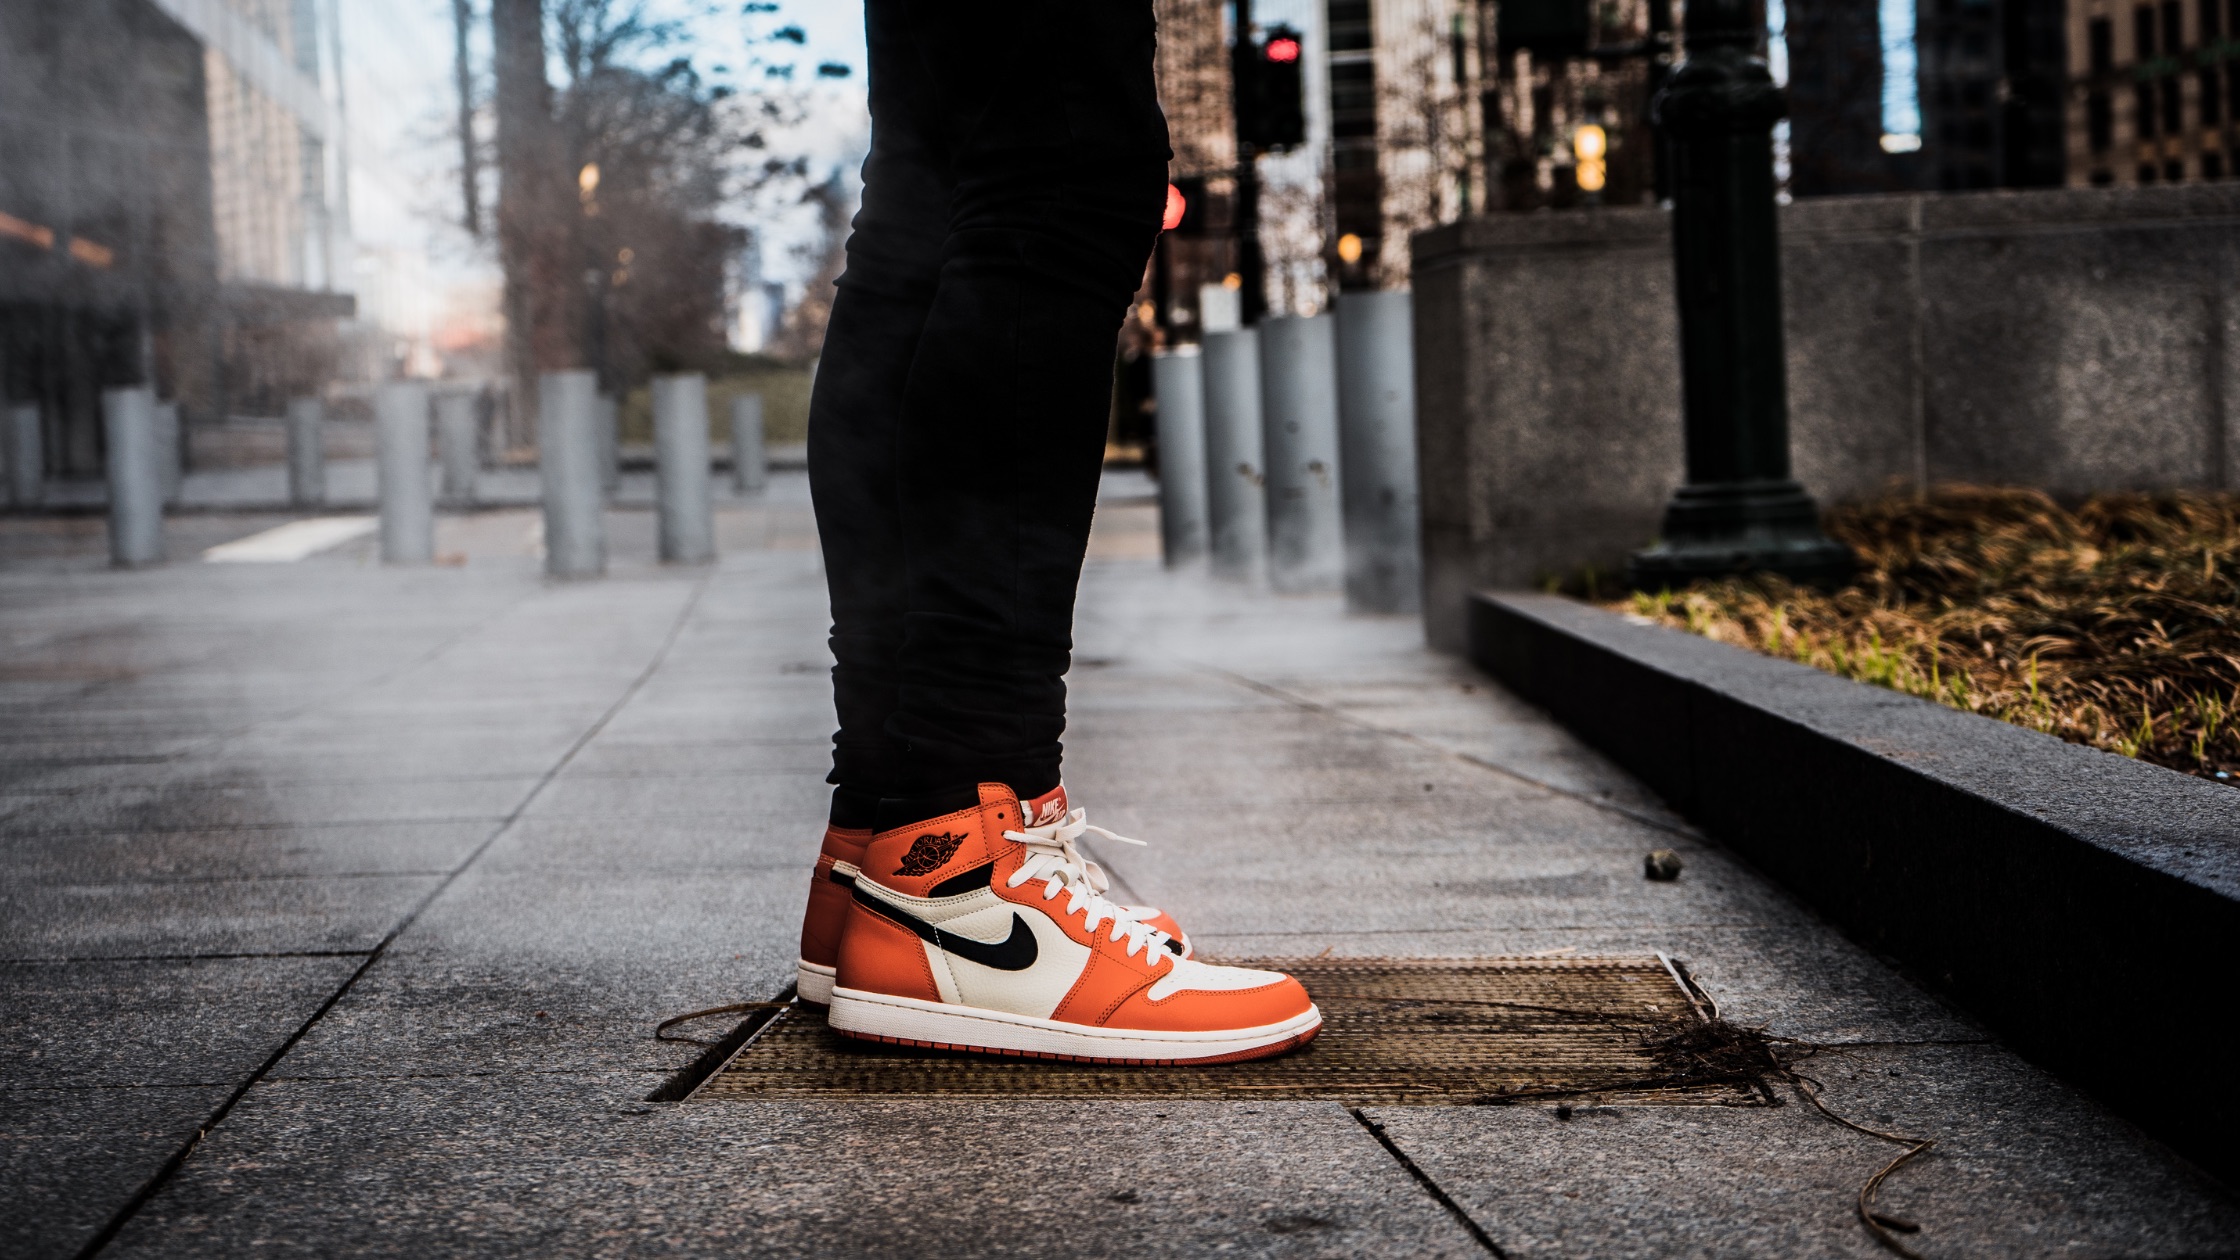 A pair of Nike sneakers on a city street